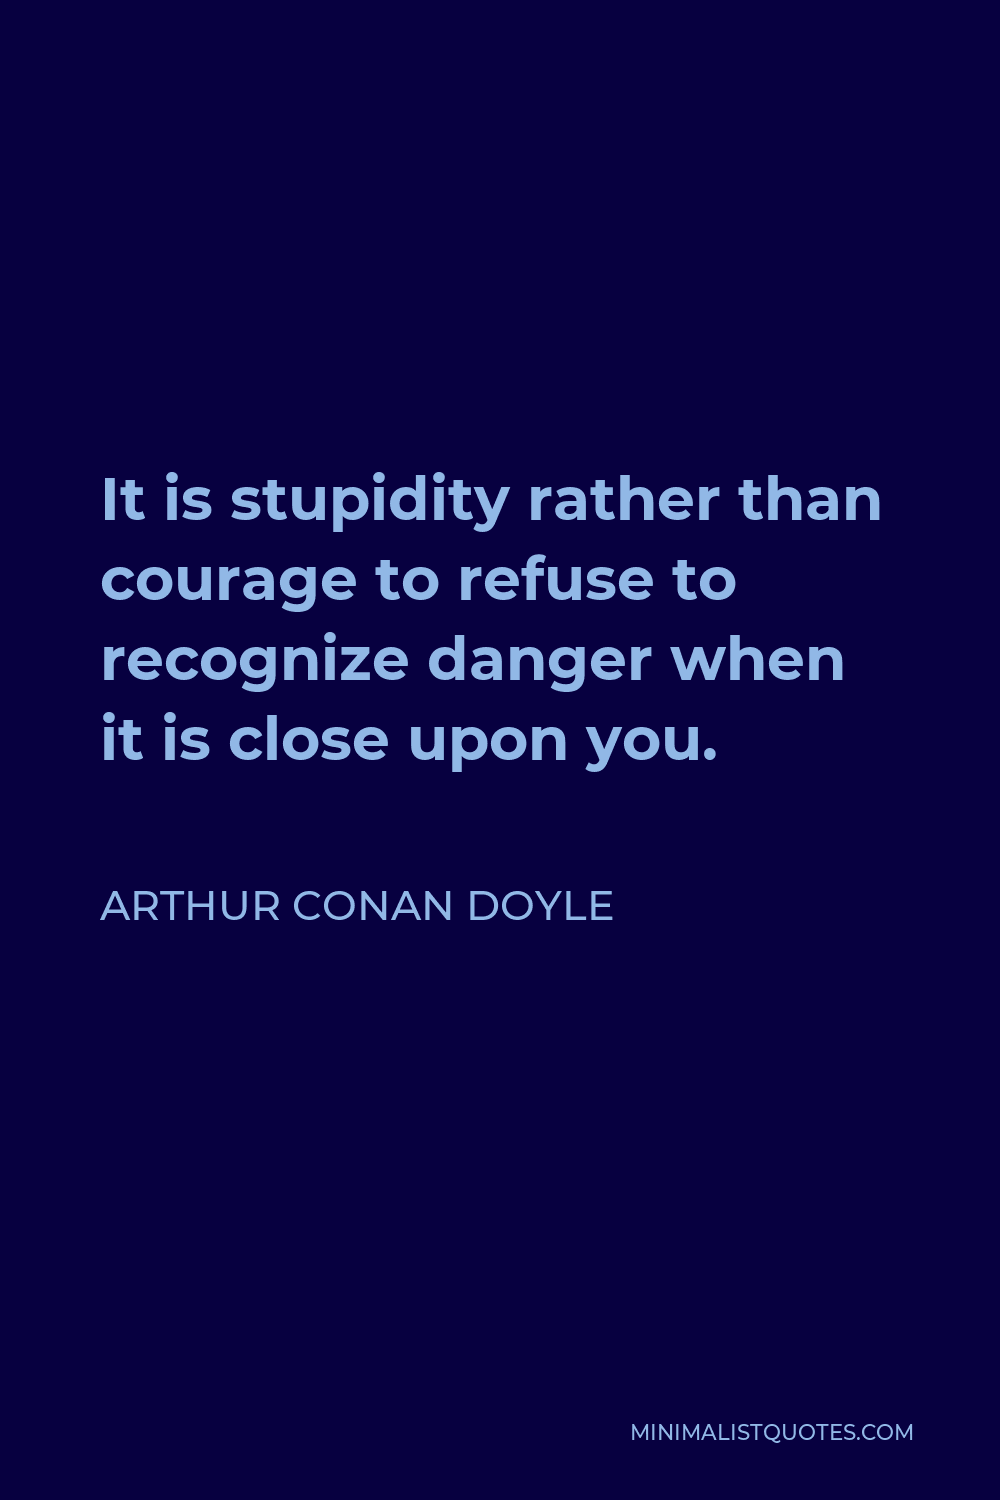 Arthur Conan Doyle Quote - It is stupidity rather than courage to refuse to recognize danger when it is close upon you.